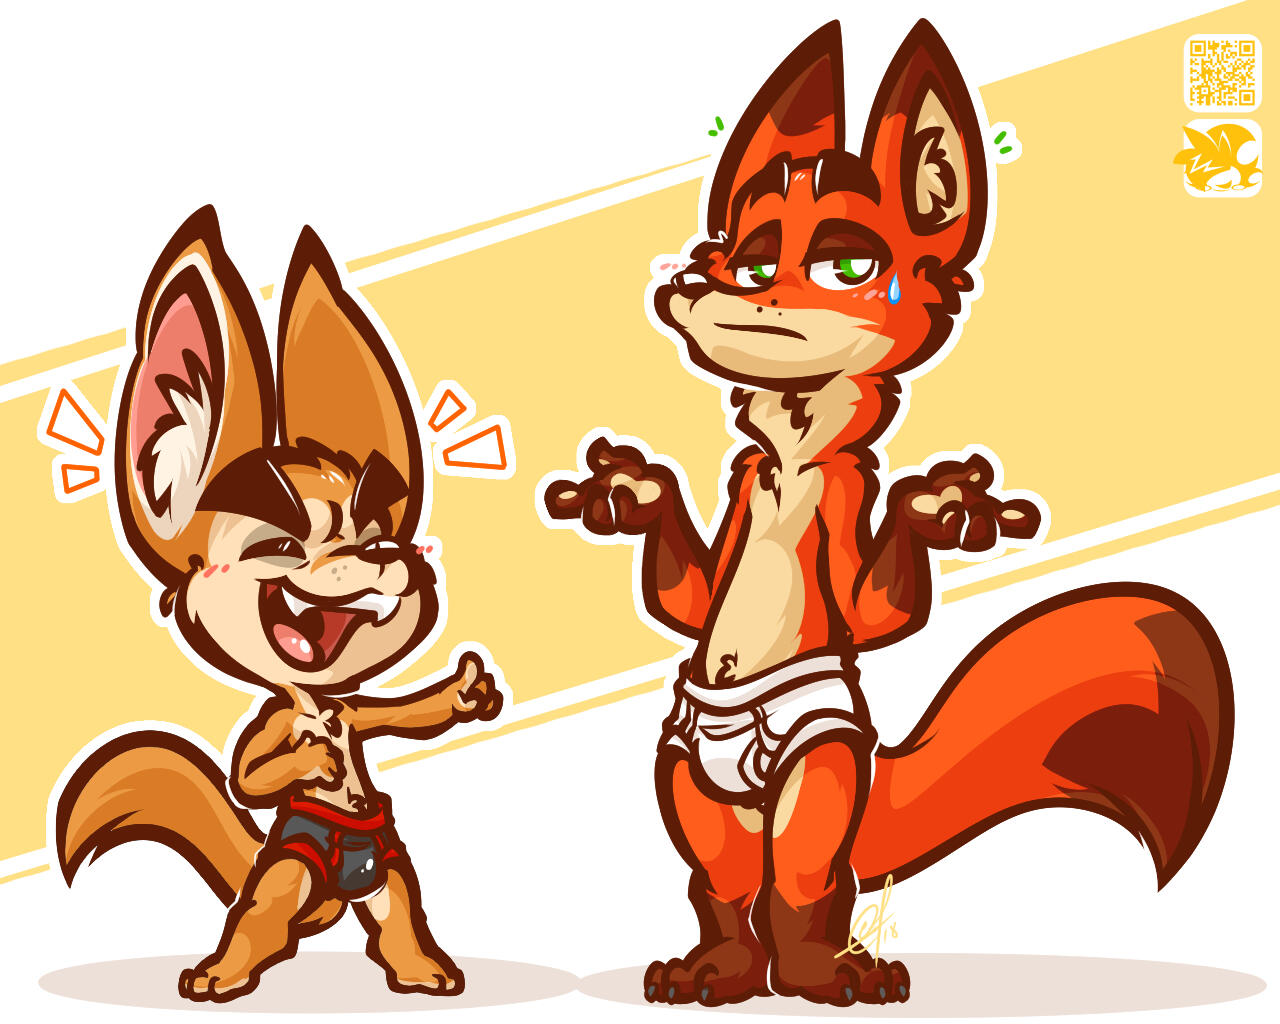 Finnick in black briefs with red trim, and Nick in white briefs.